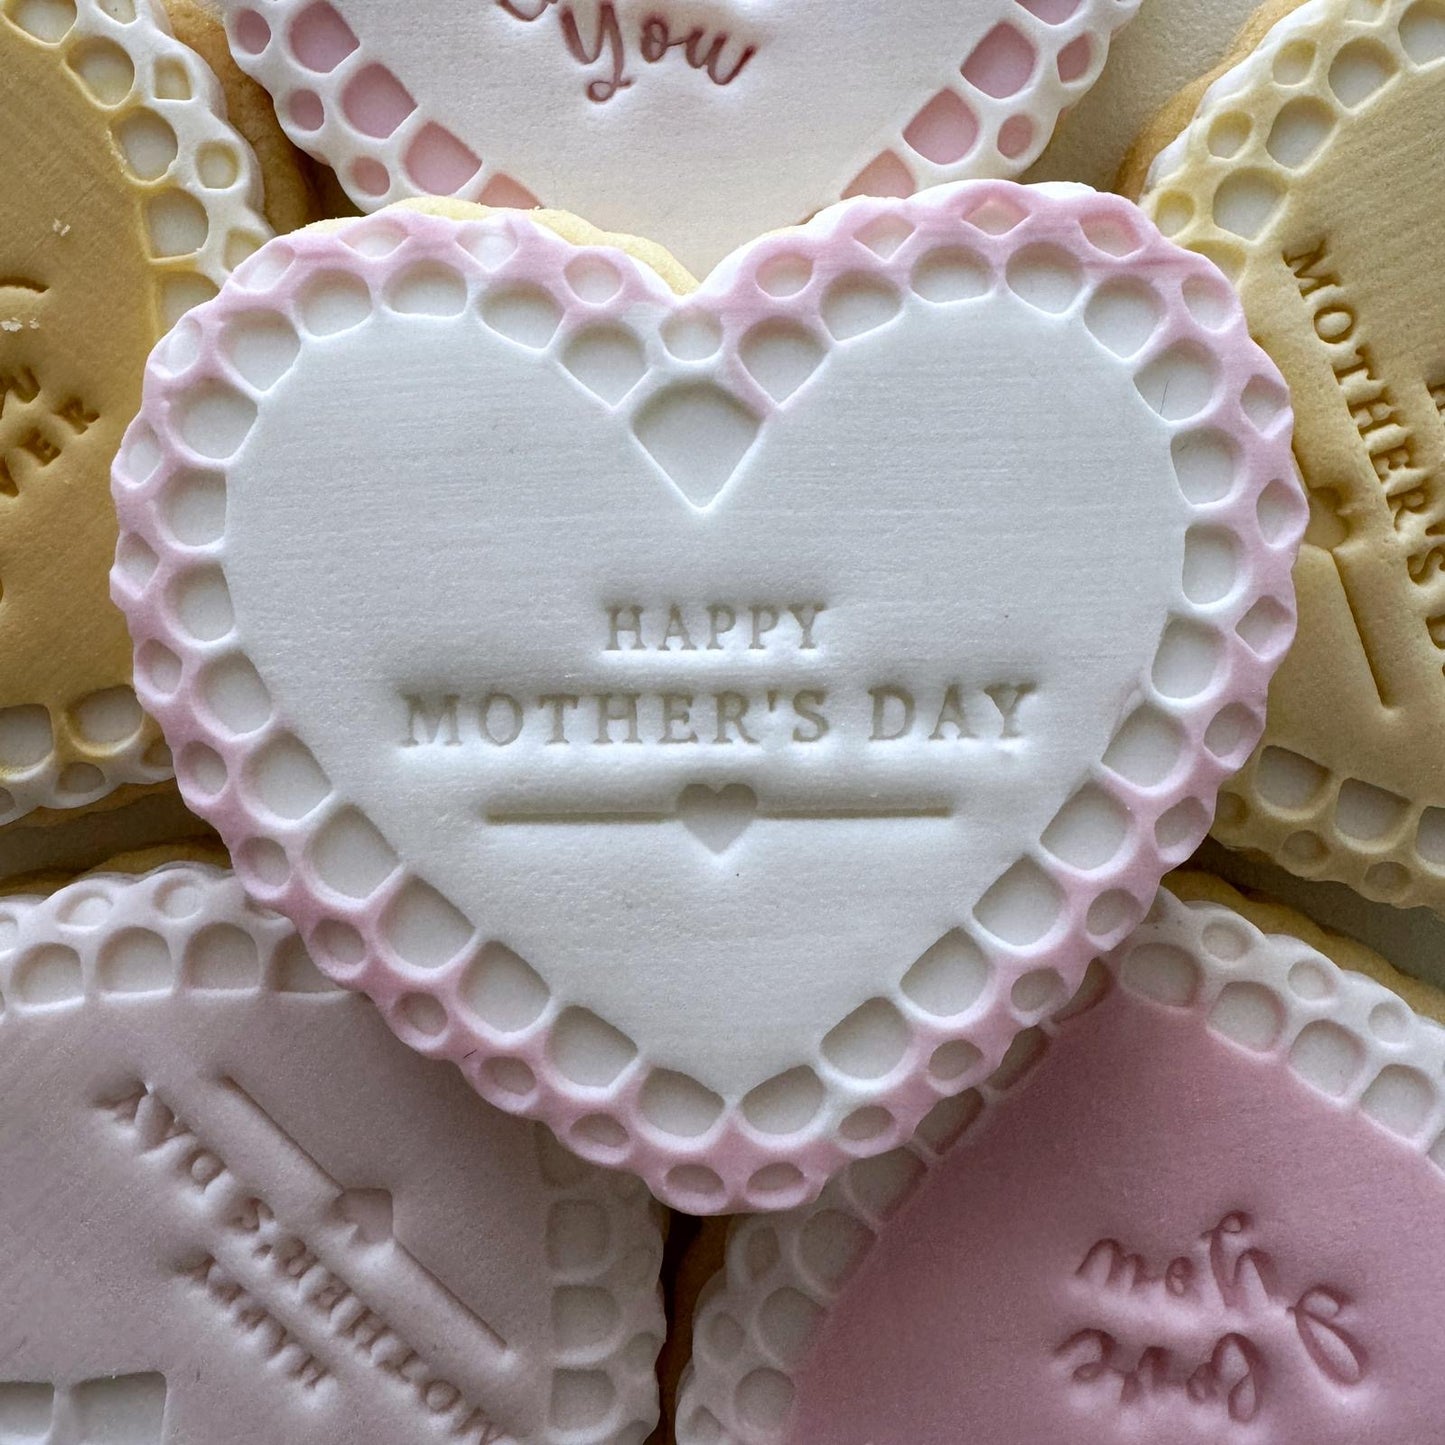 Happy Mother’s Day Impression Stamp